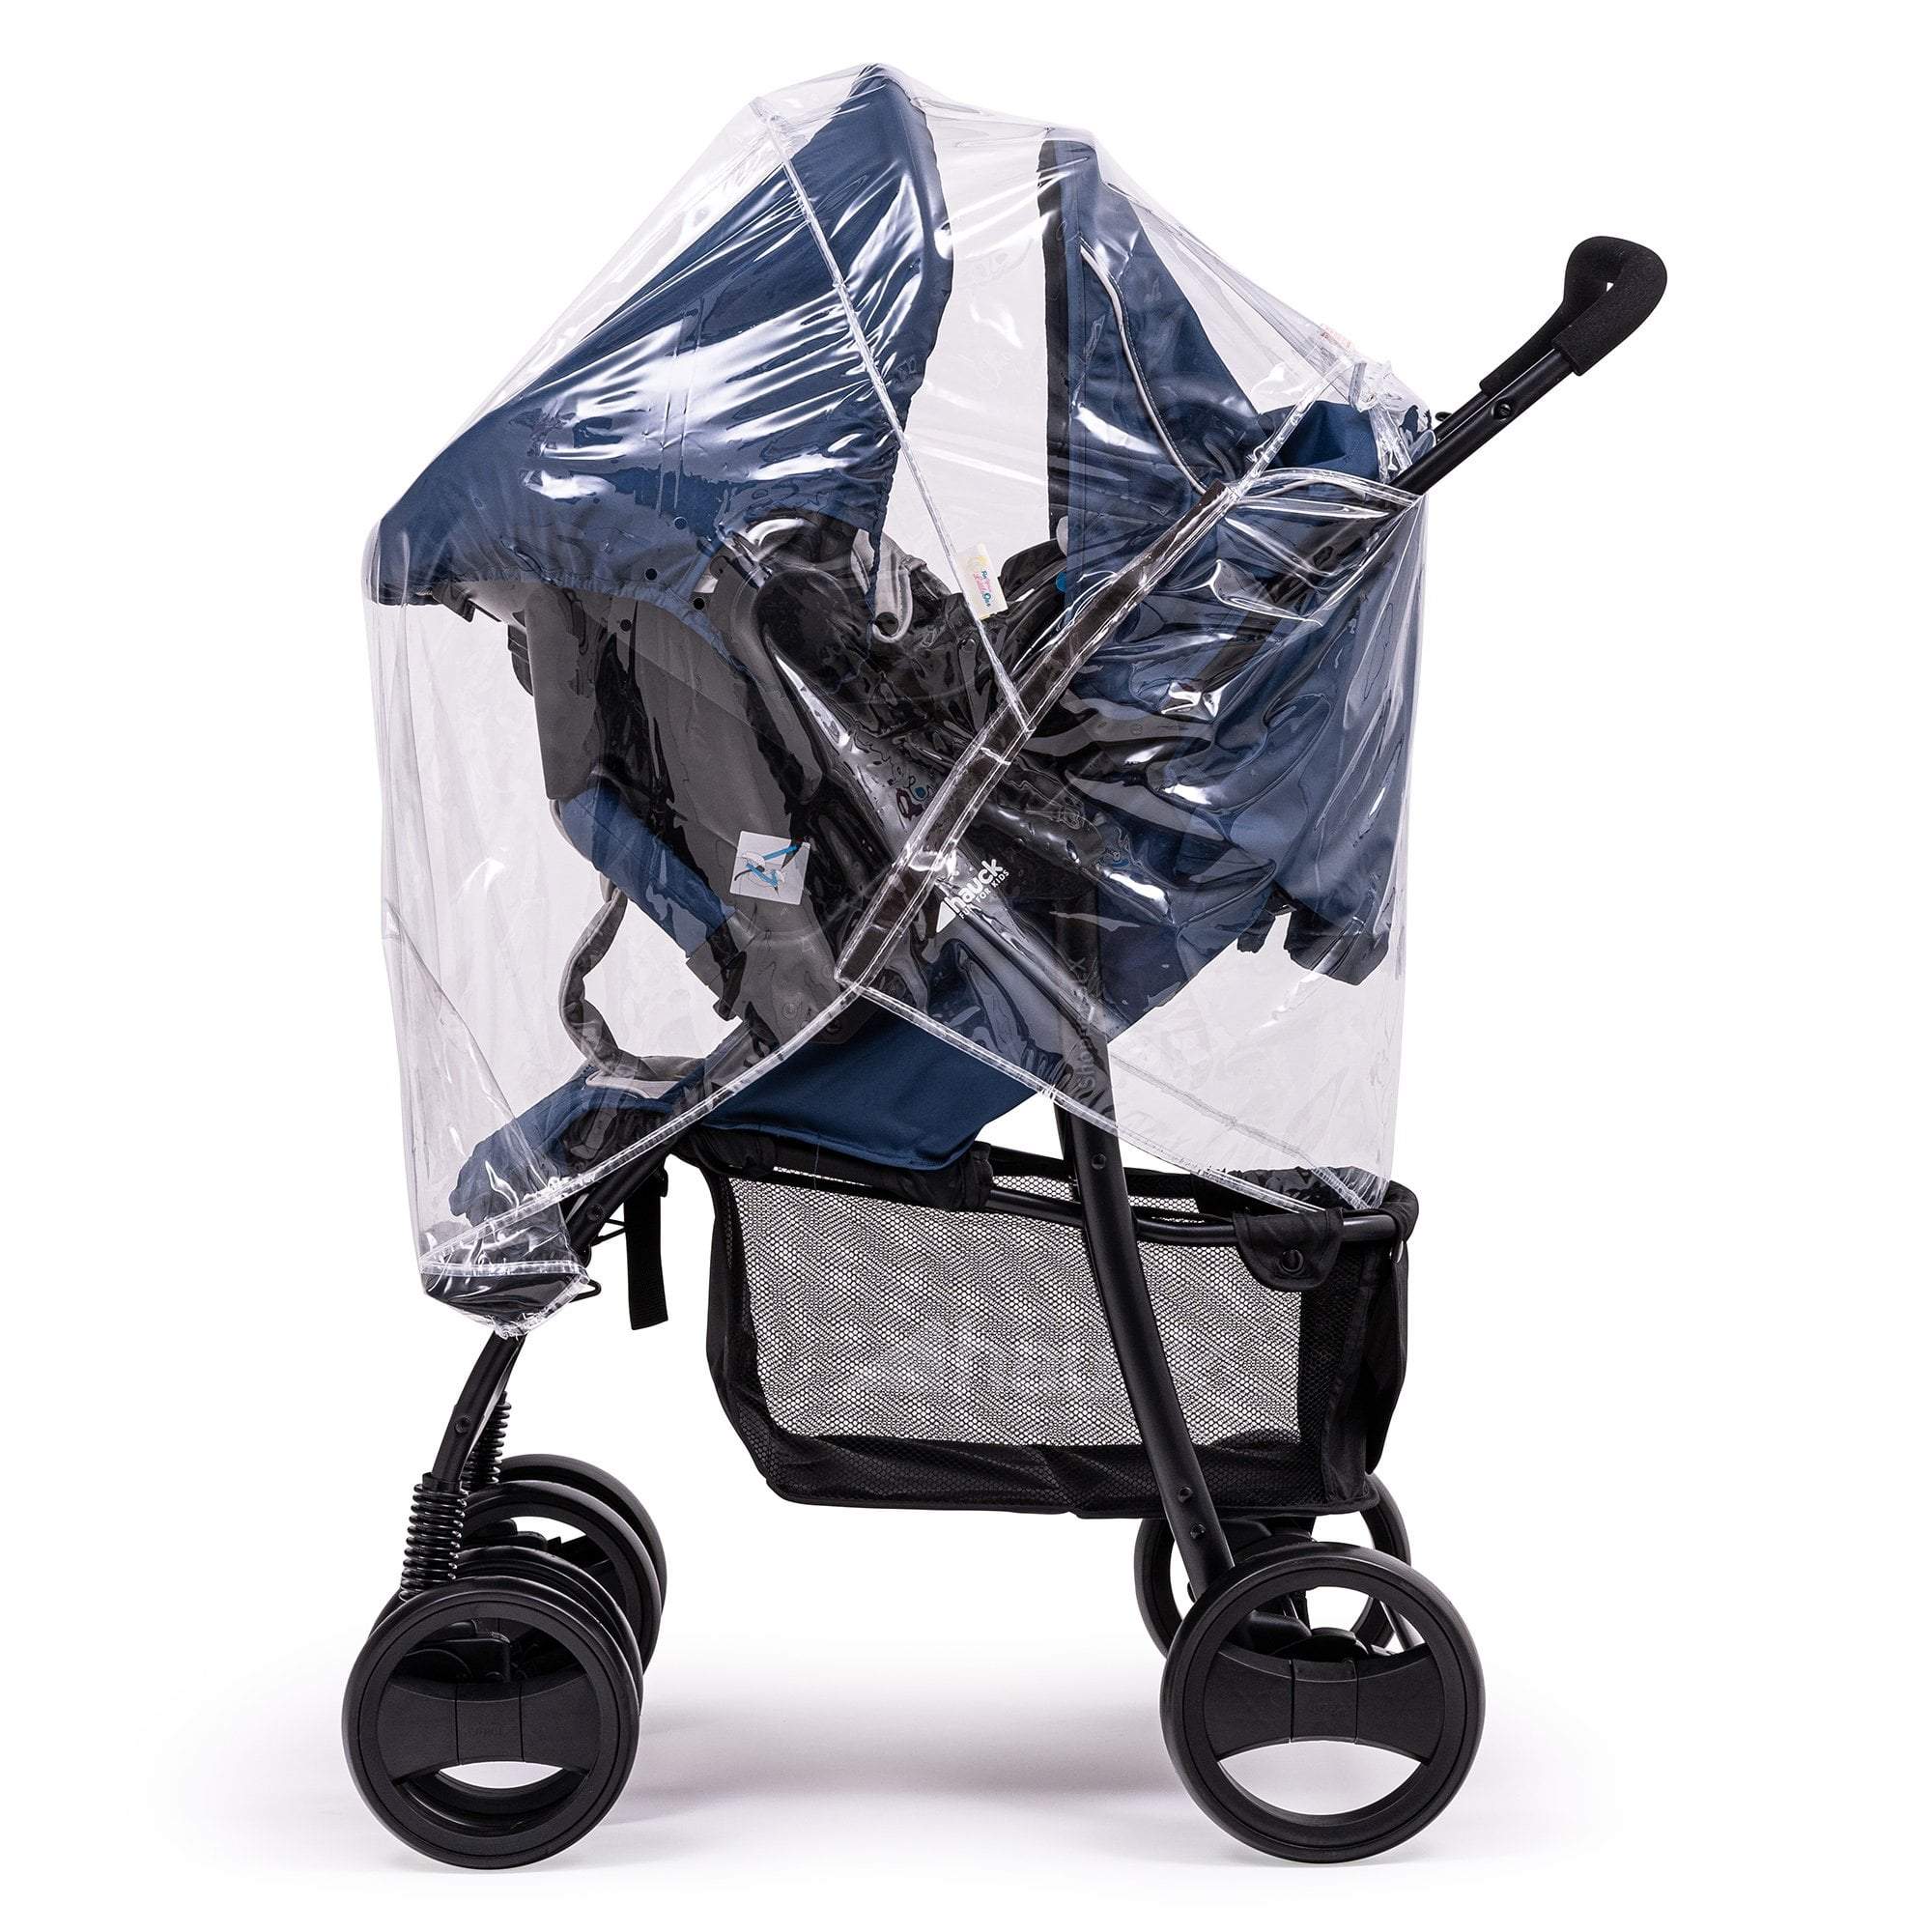 Travel System Raincover Compatible with Hybrid - Fits All Models - For Your Little One